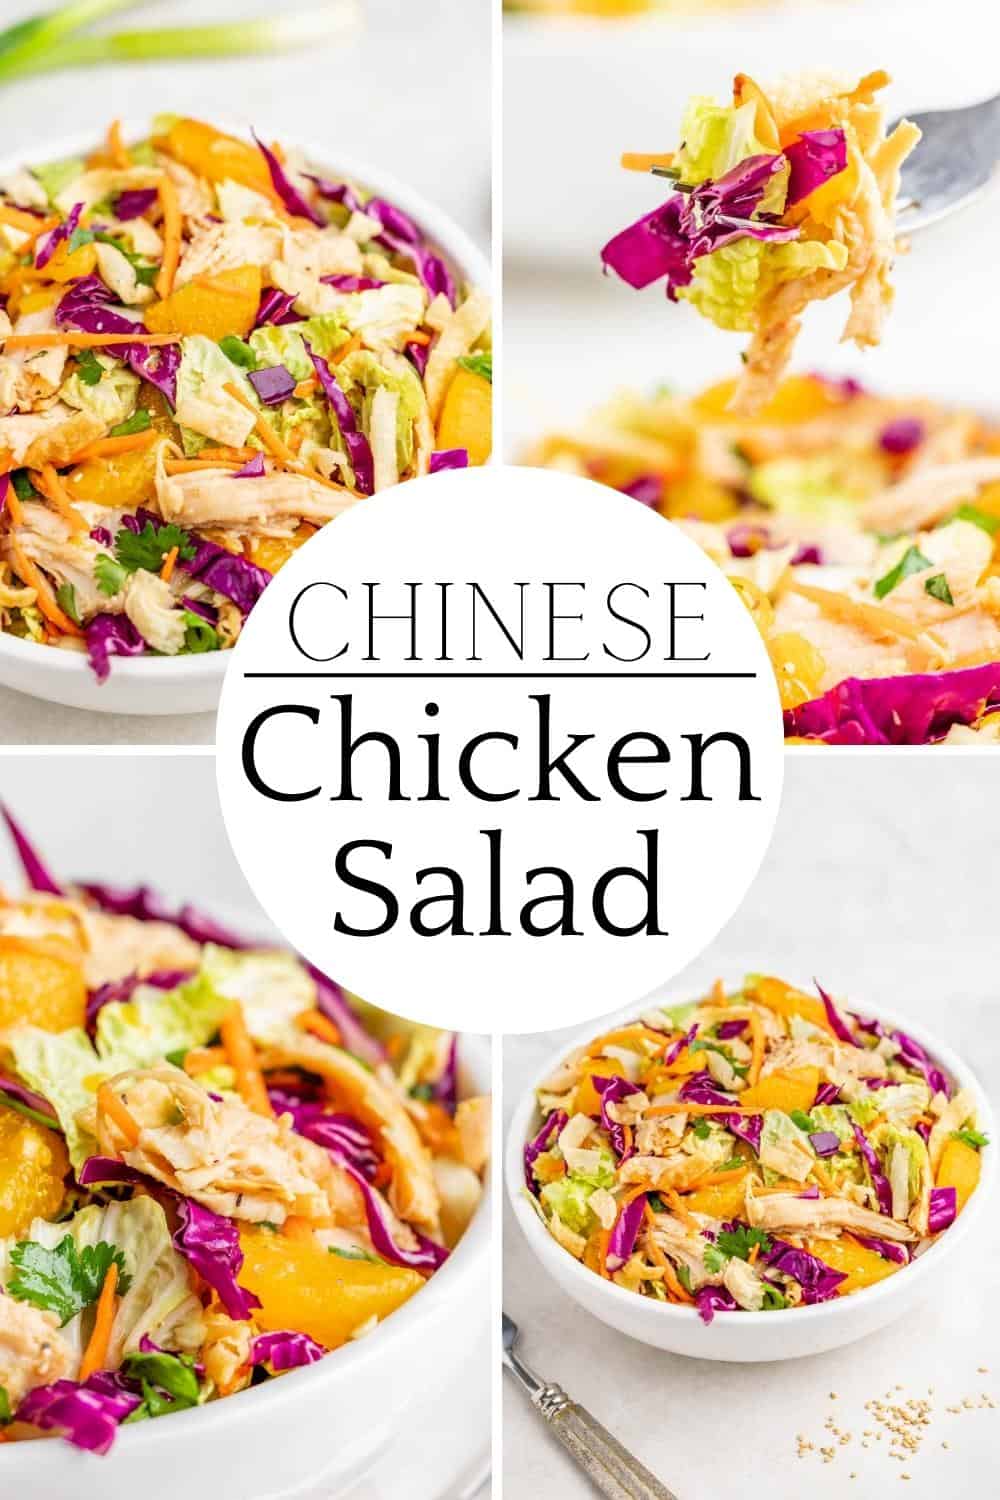 Chinese style chicken salad